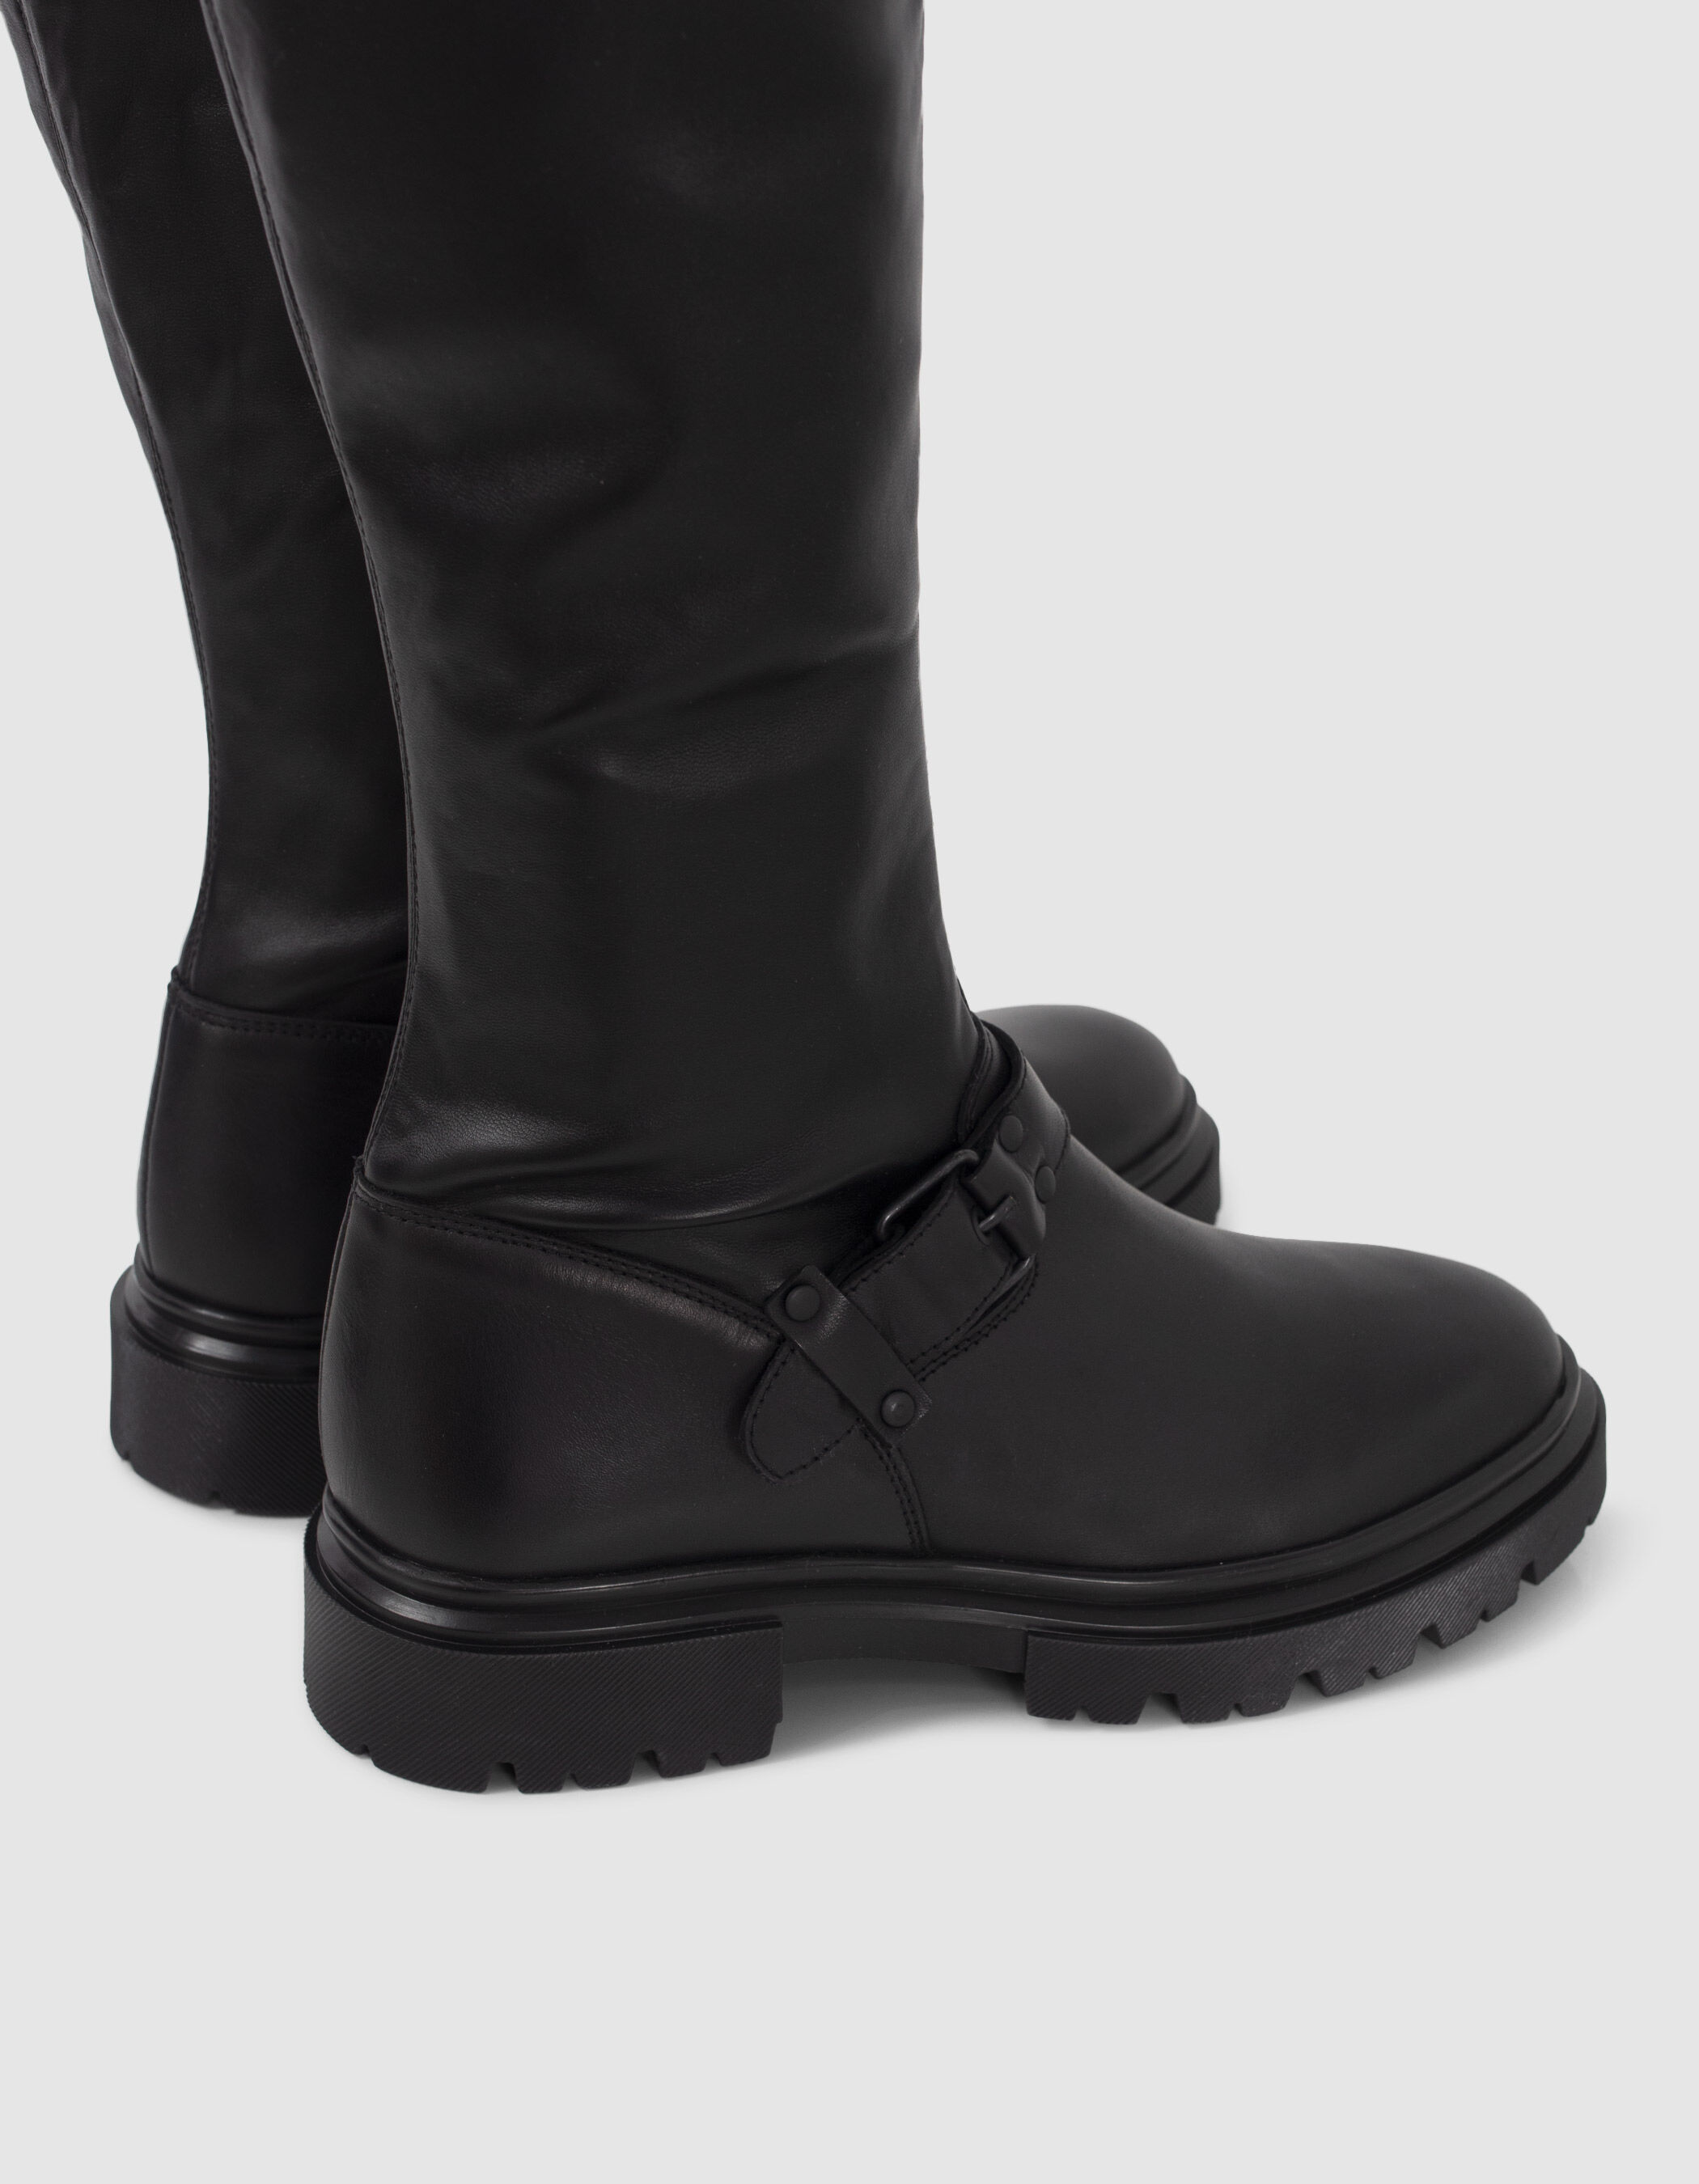 Women's black thigh-high boots with lugged soles